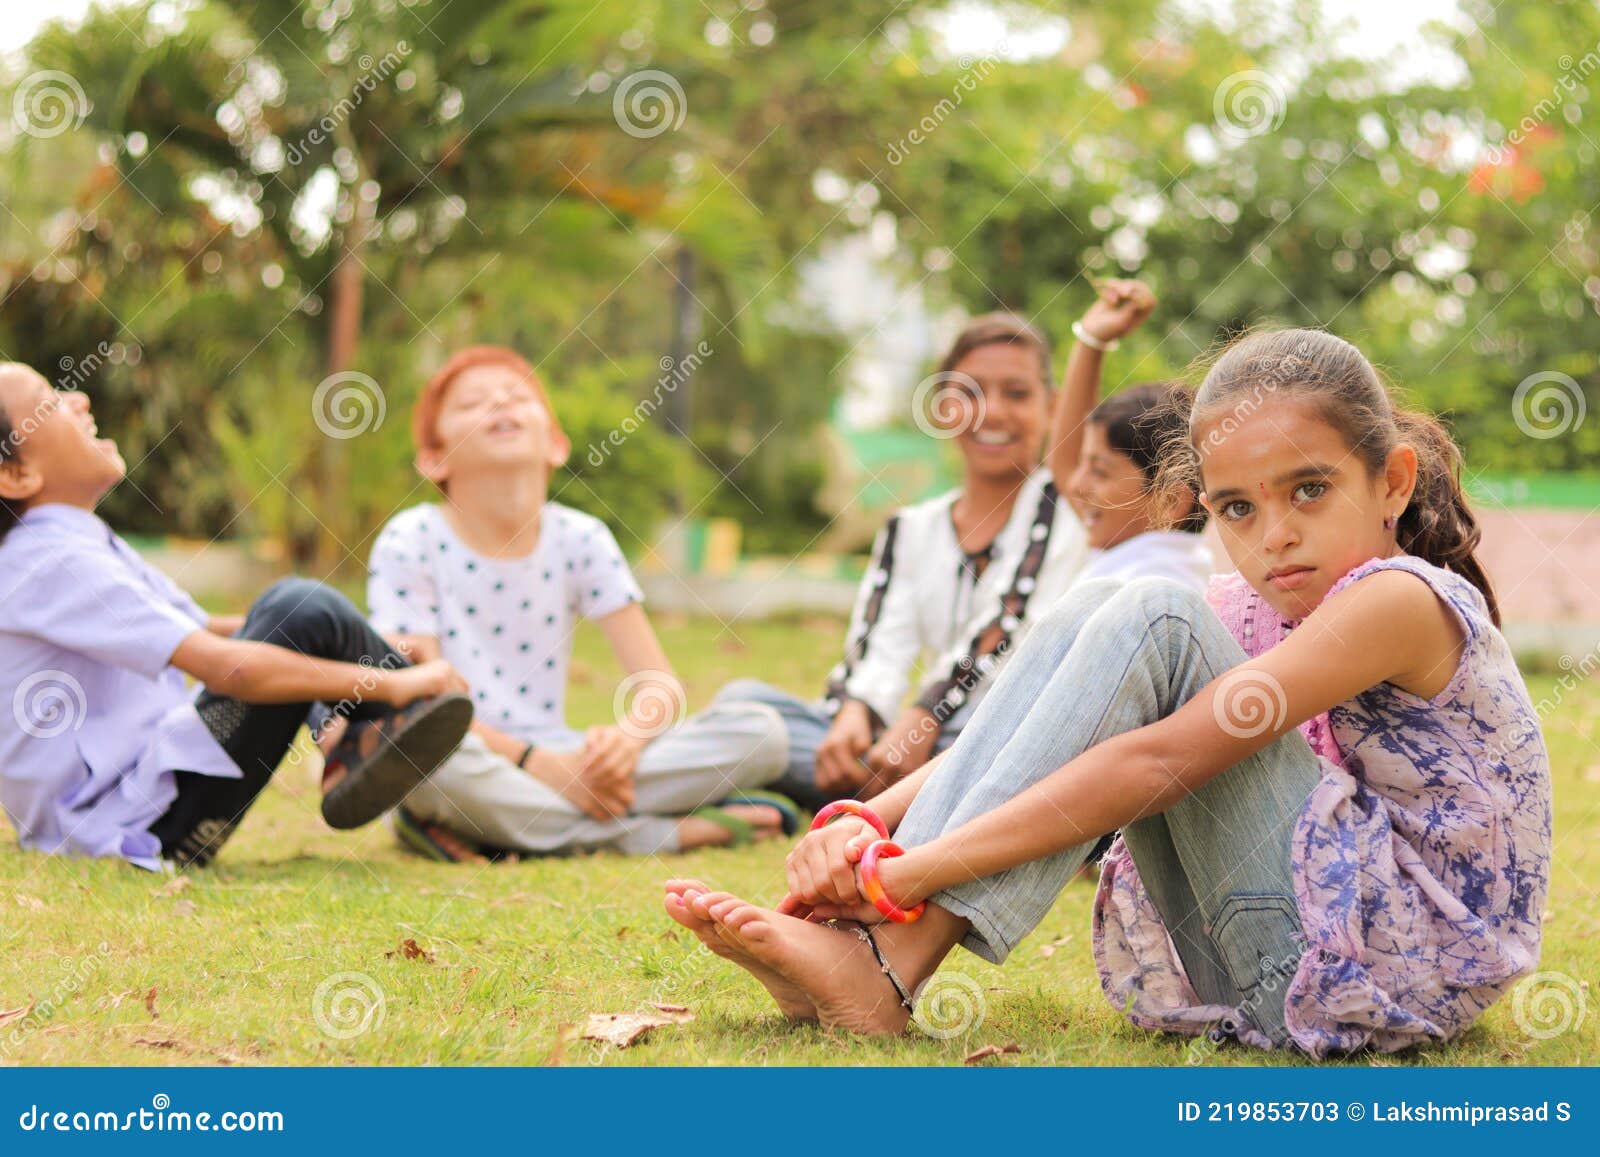 group of kids bulling girl at park during summer camp - little girl looking camera, sitting lonely while friends playingand having